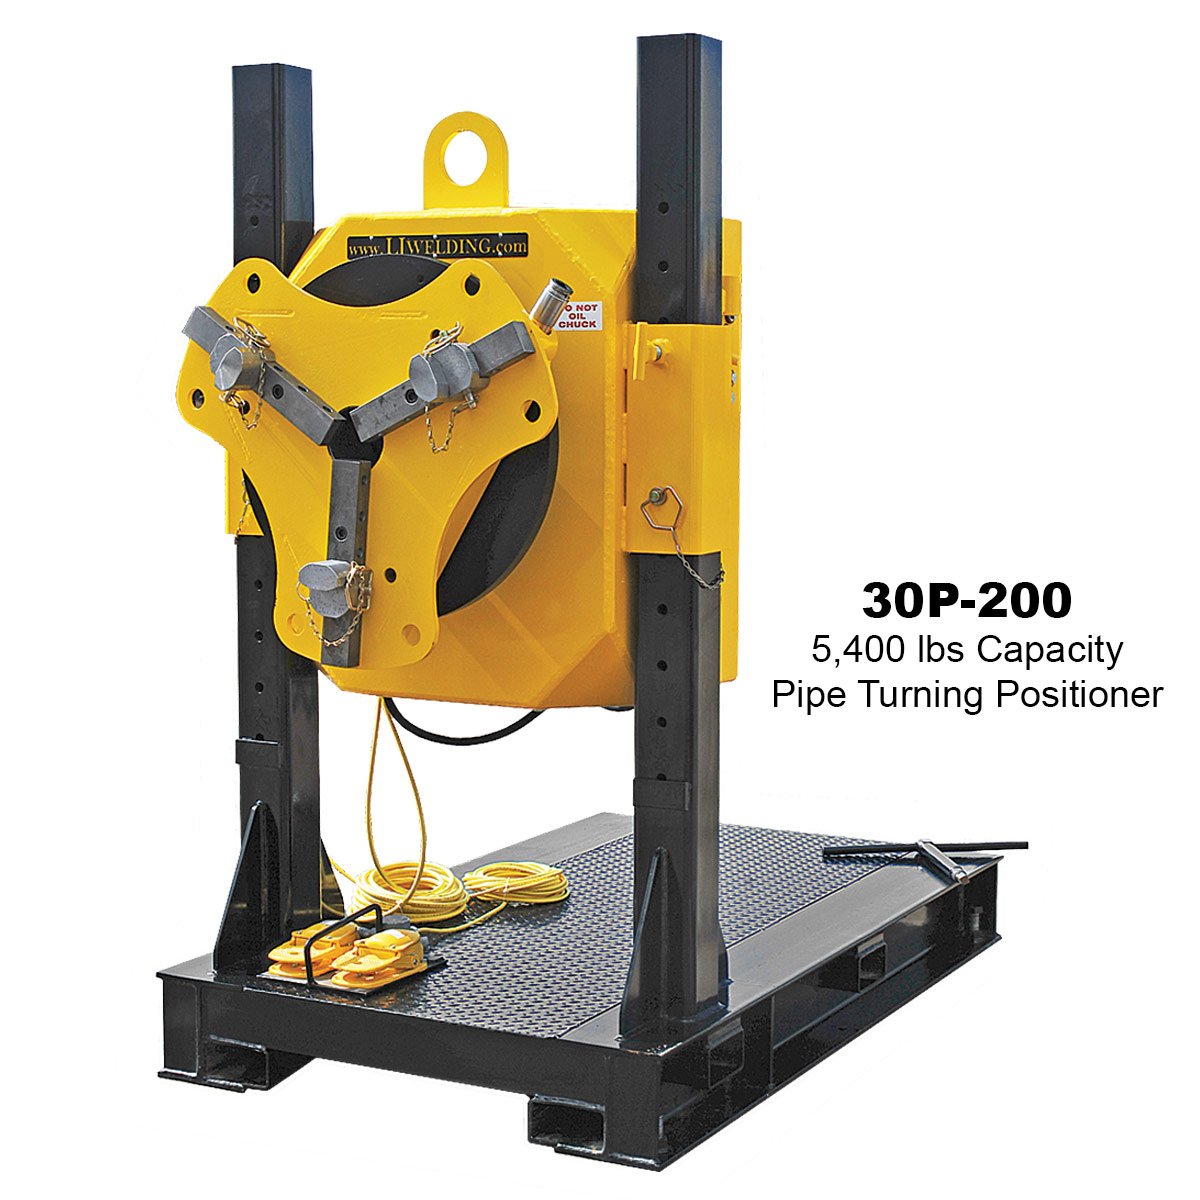 3,000 lbs pipe turning positioner fo welding